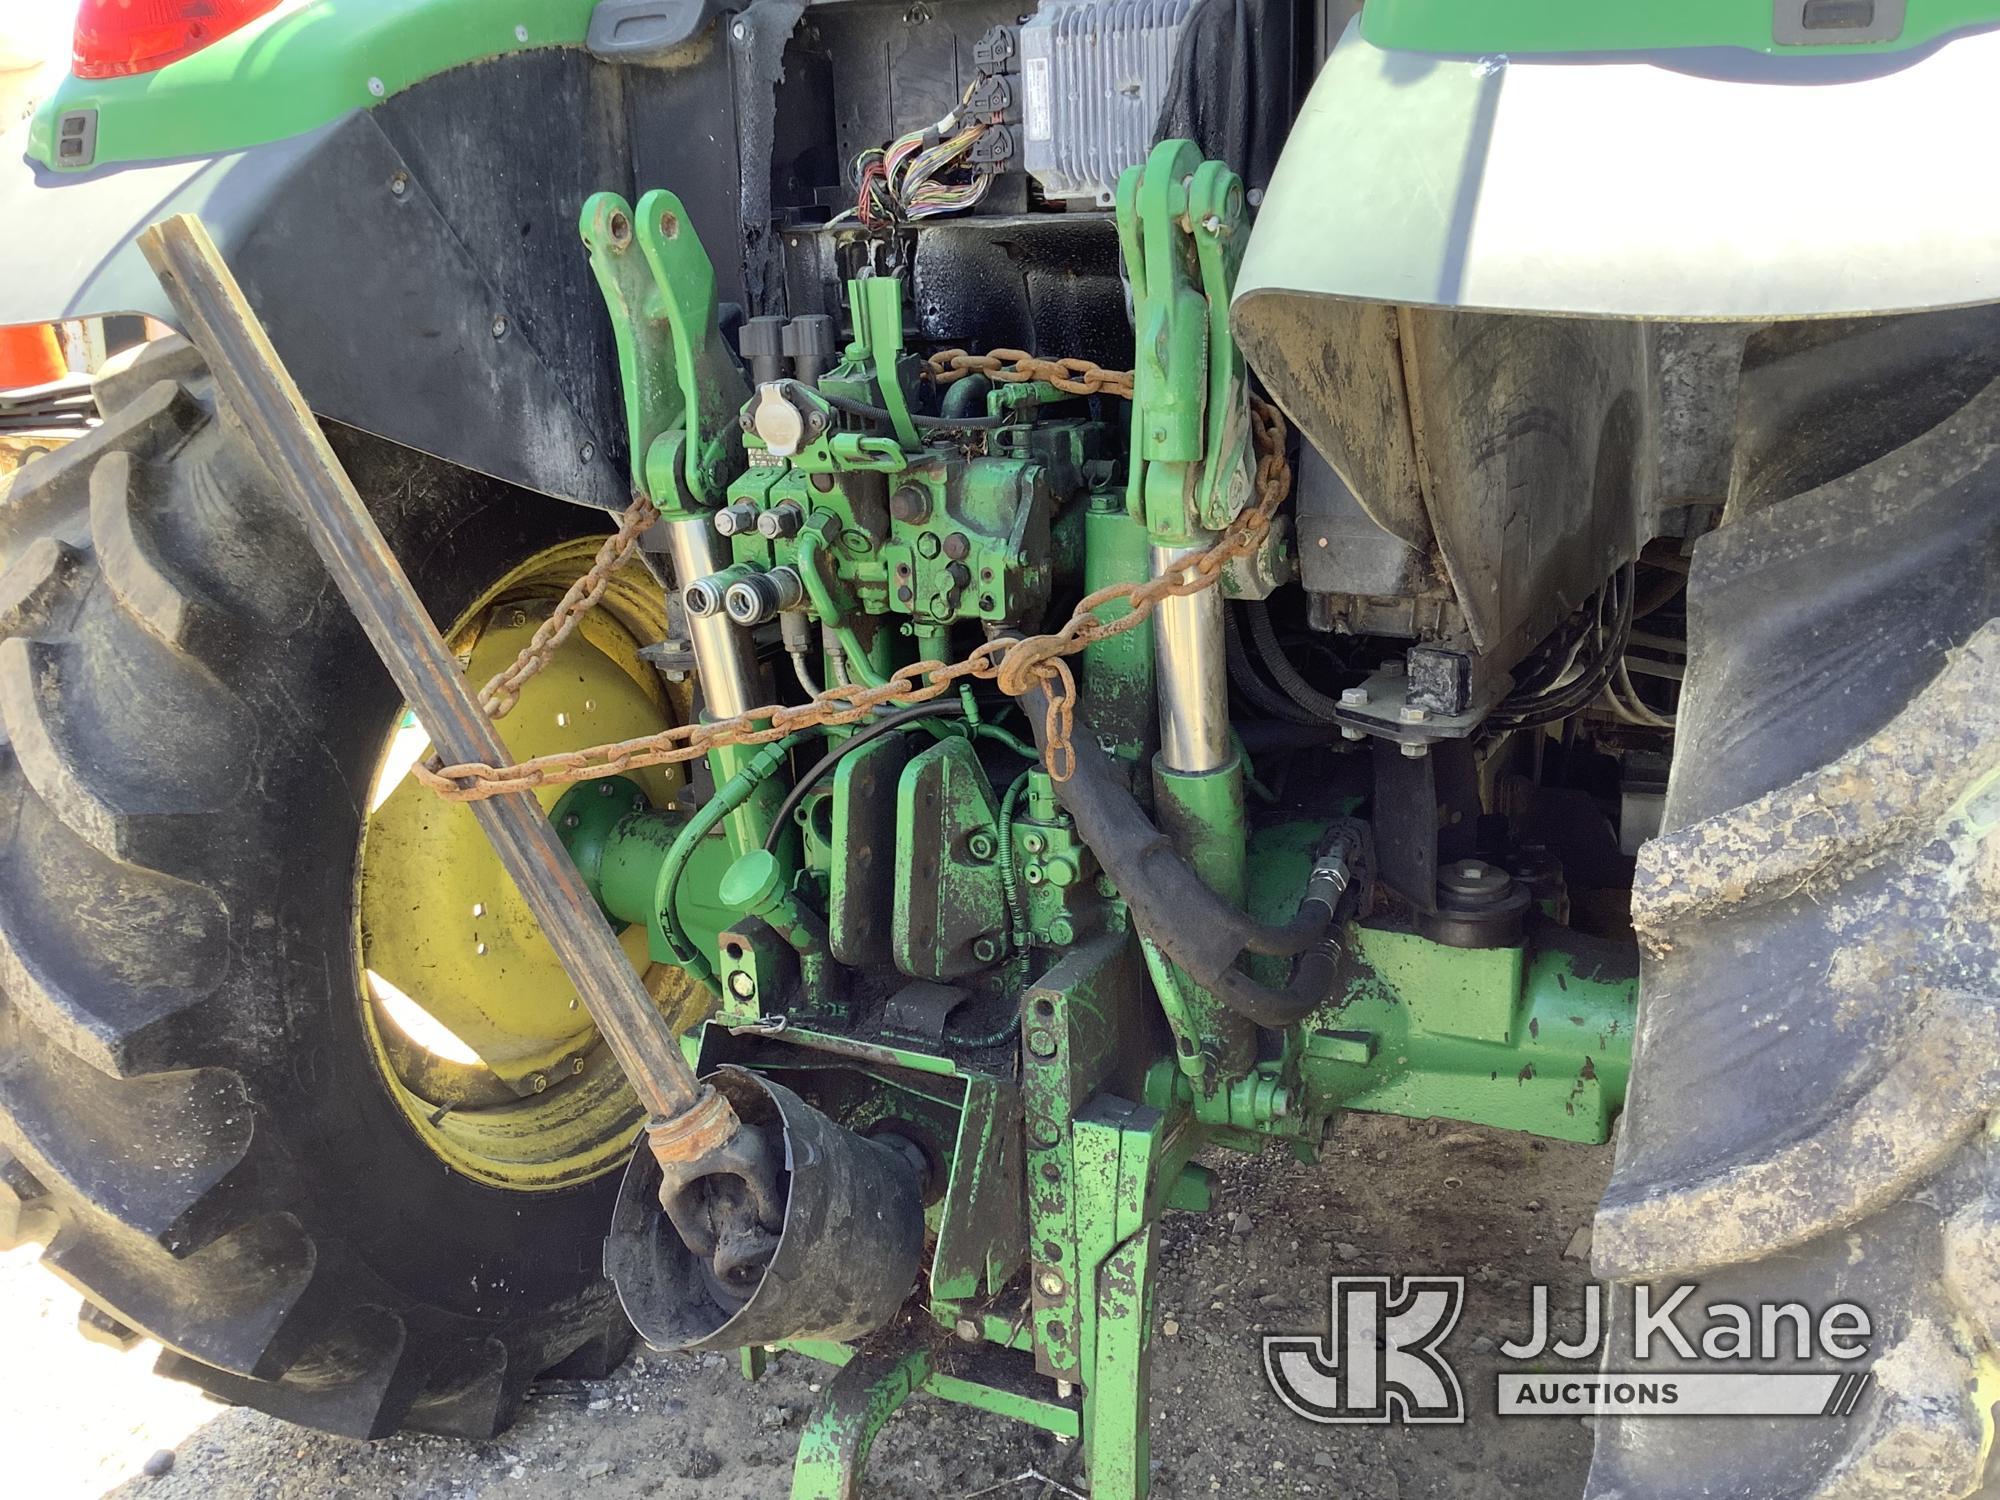 (Harmans, MD) 2016 John Deere 6120M Tractor Not Running, Electrical Fire, Condition Unknown, No Powe